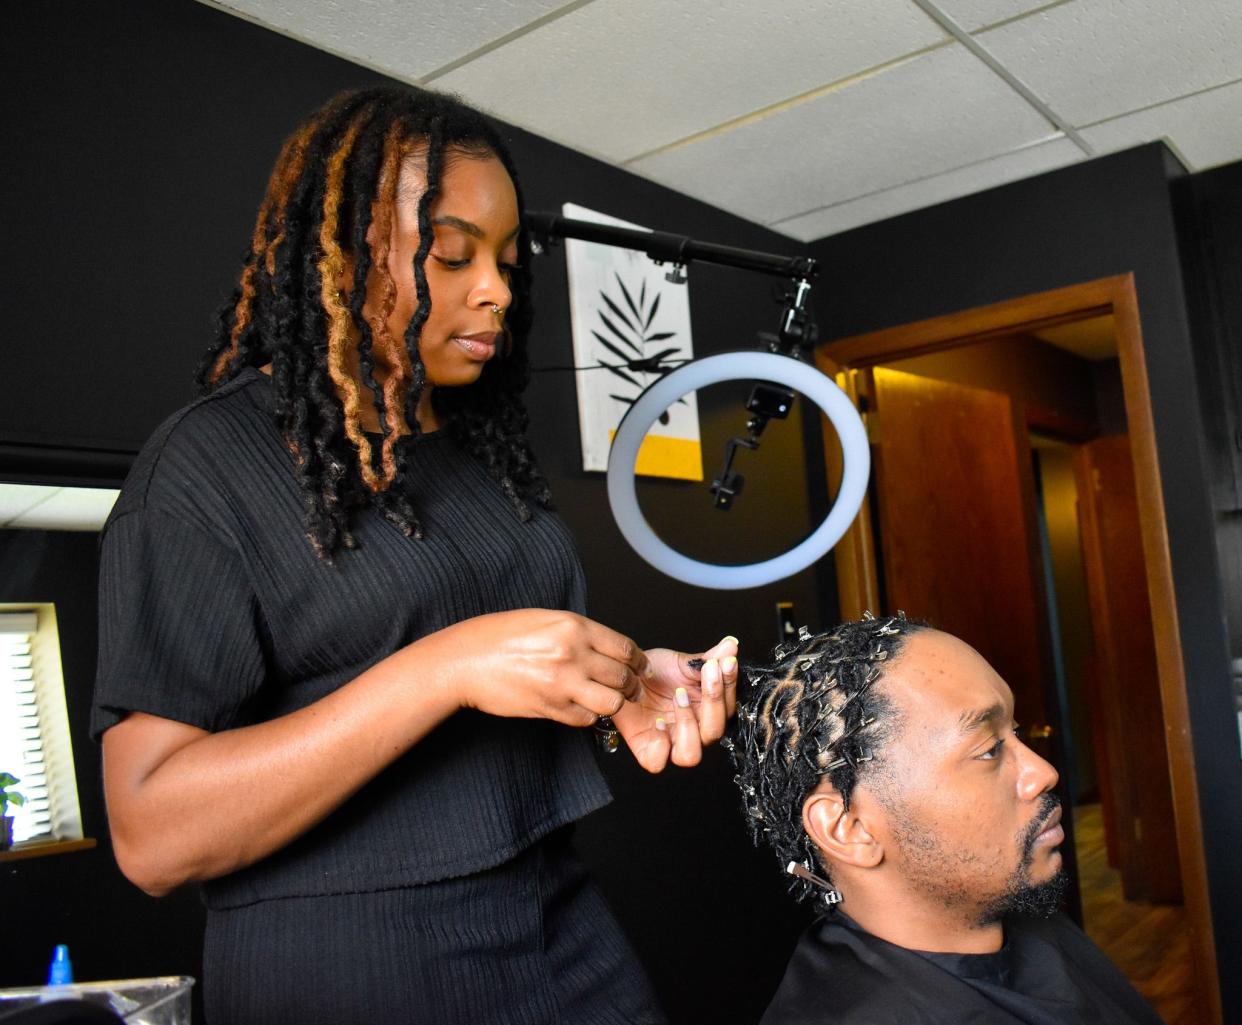 Tae Baylor, owner of the Loc Gallery in West Allis, styles client Tyce Batemon's hair into locs. Batemon, 32, just started growing his natural hair out in February, he said. Before, he didn't have the confidence to wear his natural hair, he said. "Now, I say to hell with that," Batemon said. "I'm going to be me, and I'm going to carry myself how I've been carrying myself."